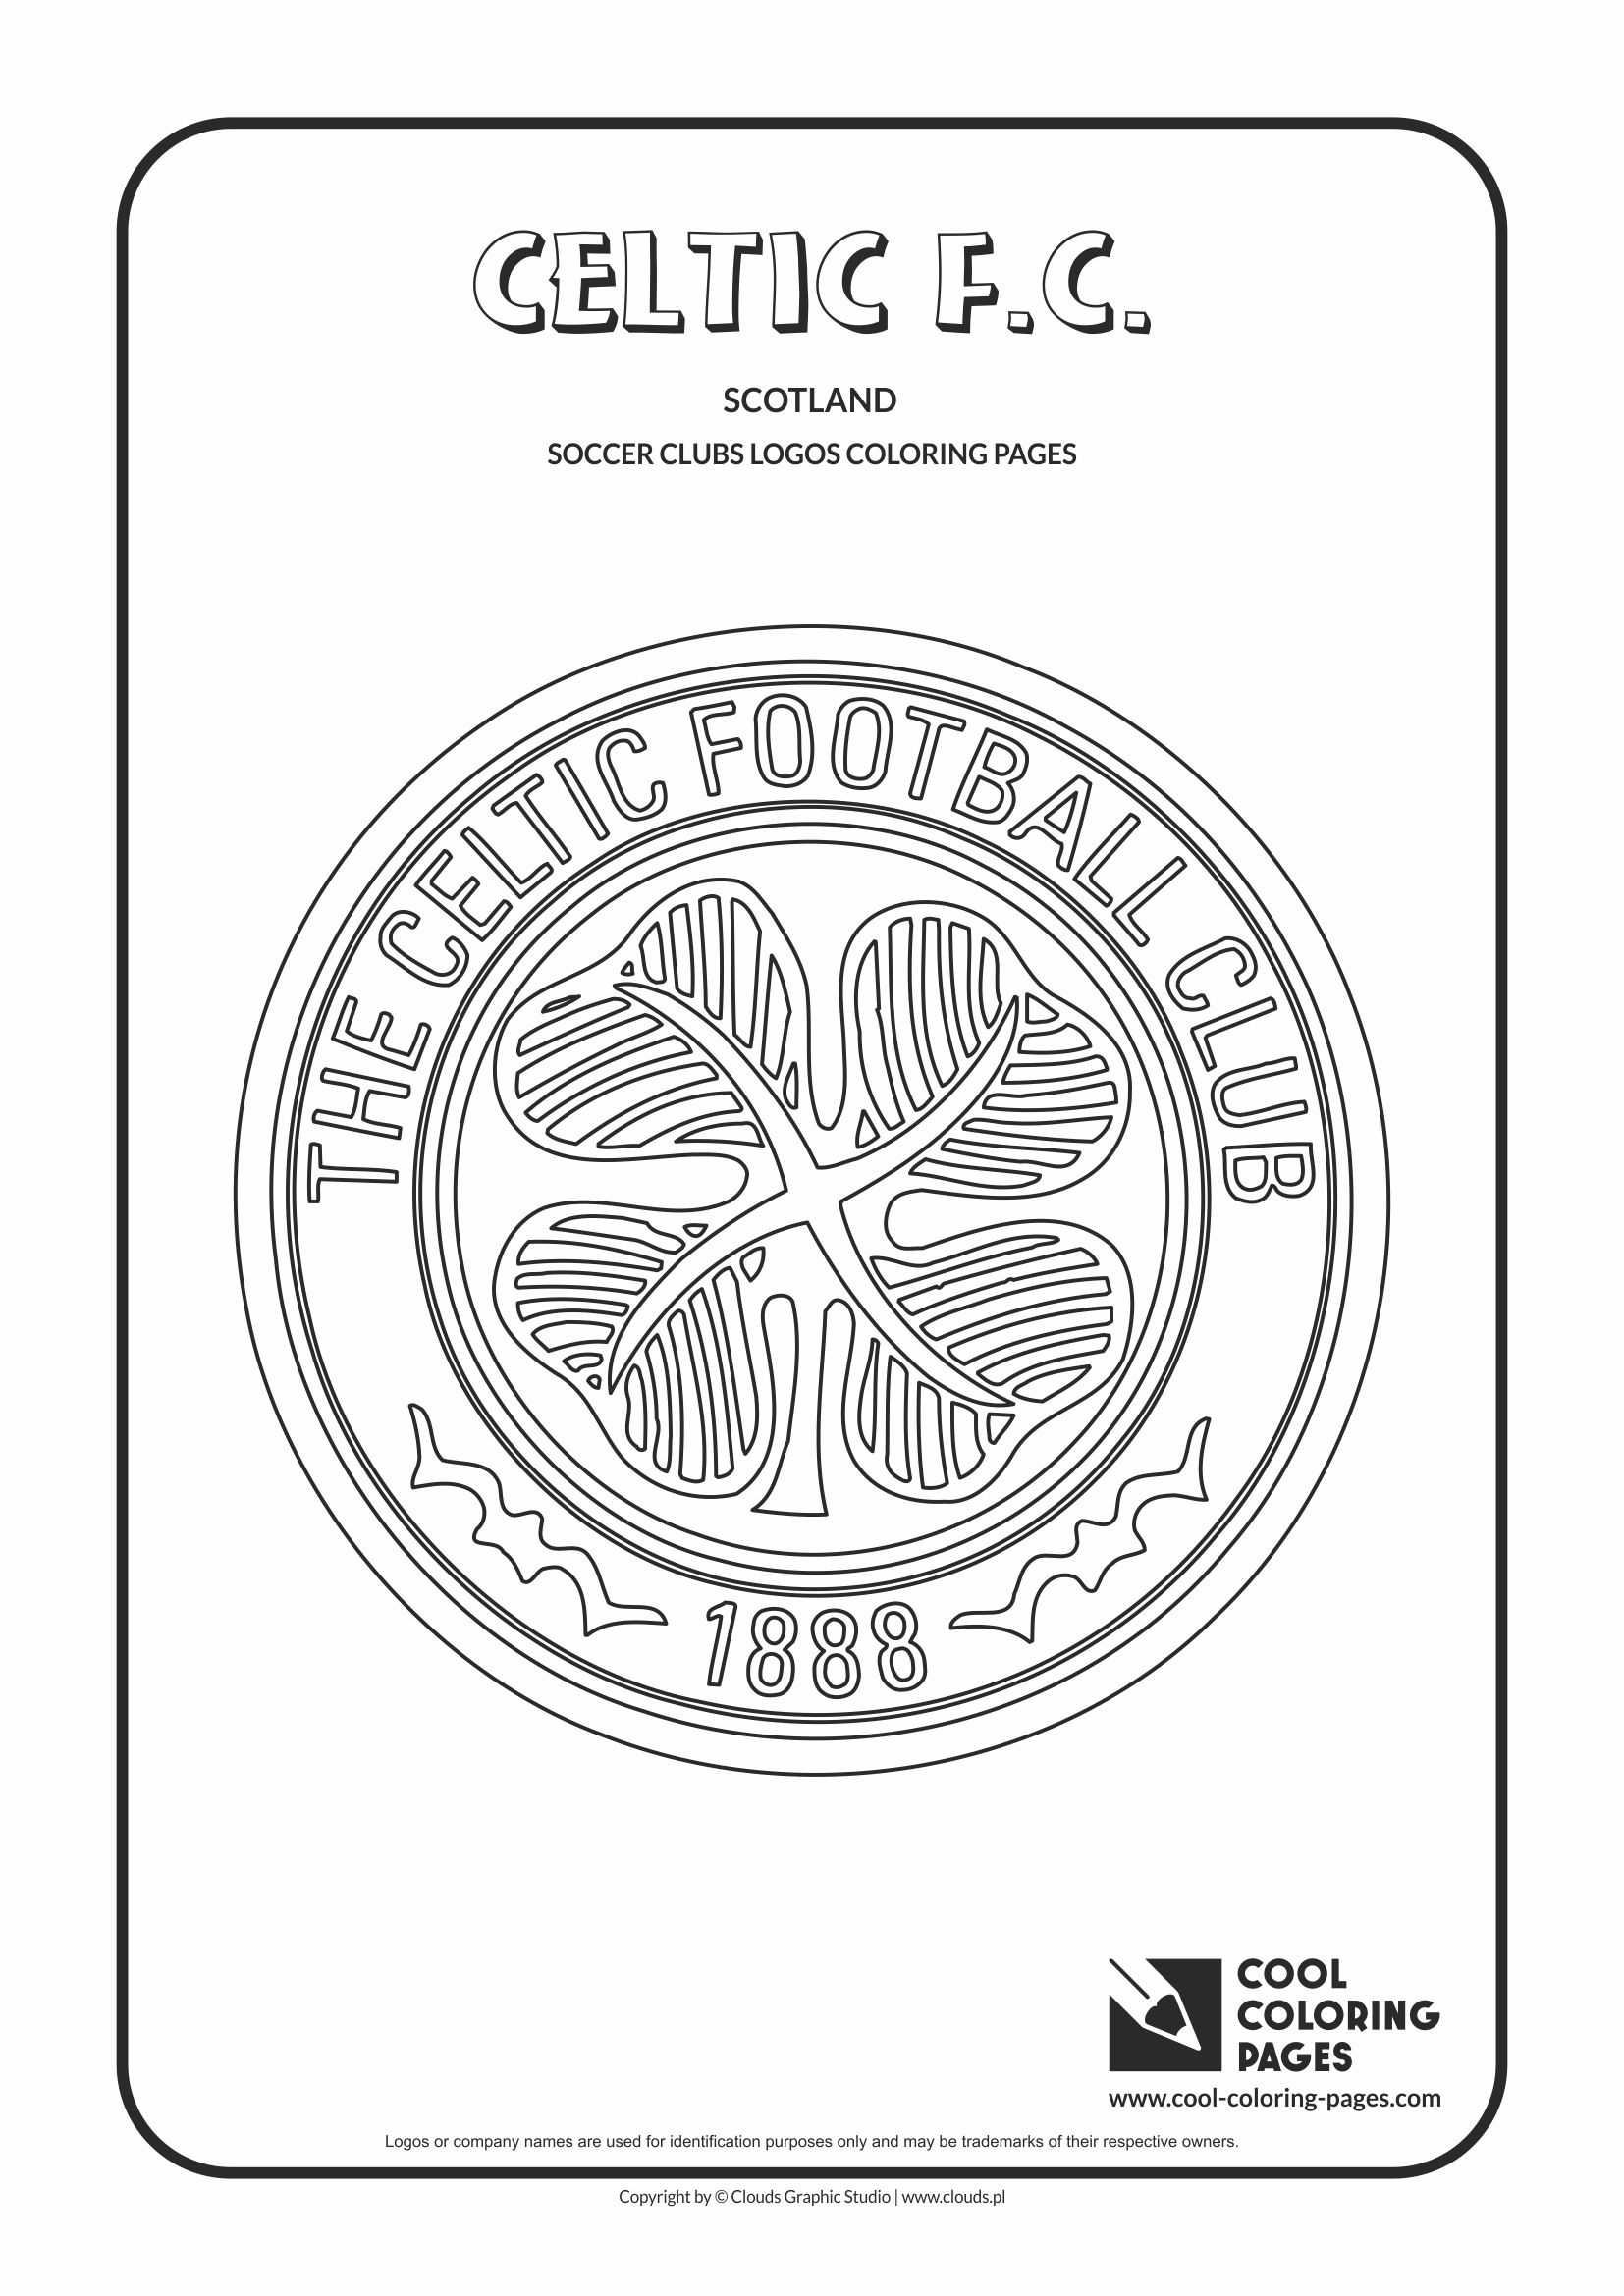 Celtic F.C. logo coloring / Coloring page with Celtic F.C. logo / Celtic F.C. logo colouring page.